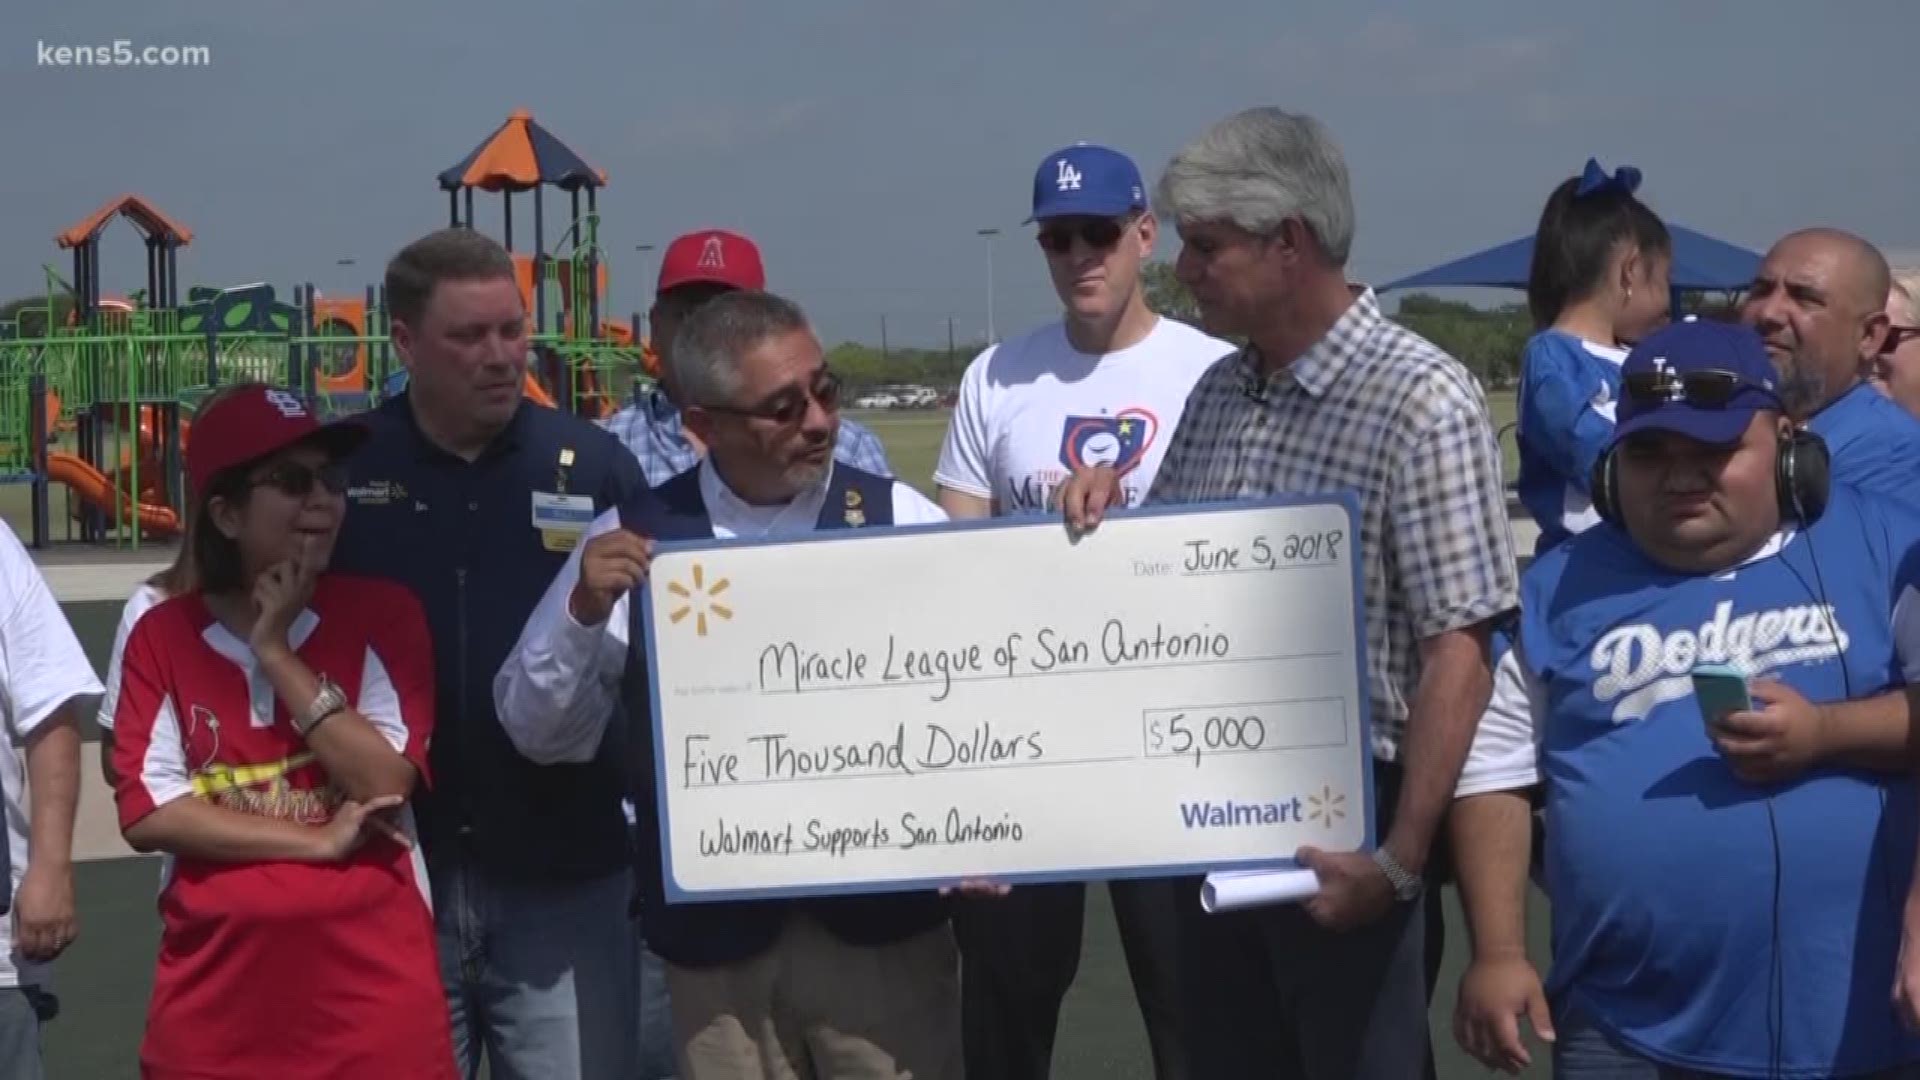 When word spread thieves stole thousands of dollars' worth of equipment the community came together to show their support for the miracle league of San Antonio. Eyewitness News reporter Adi Guajardo shows us how.